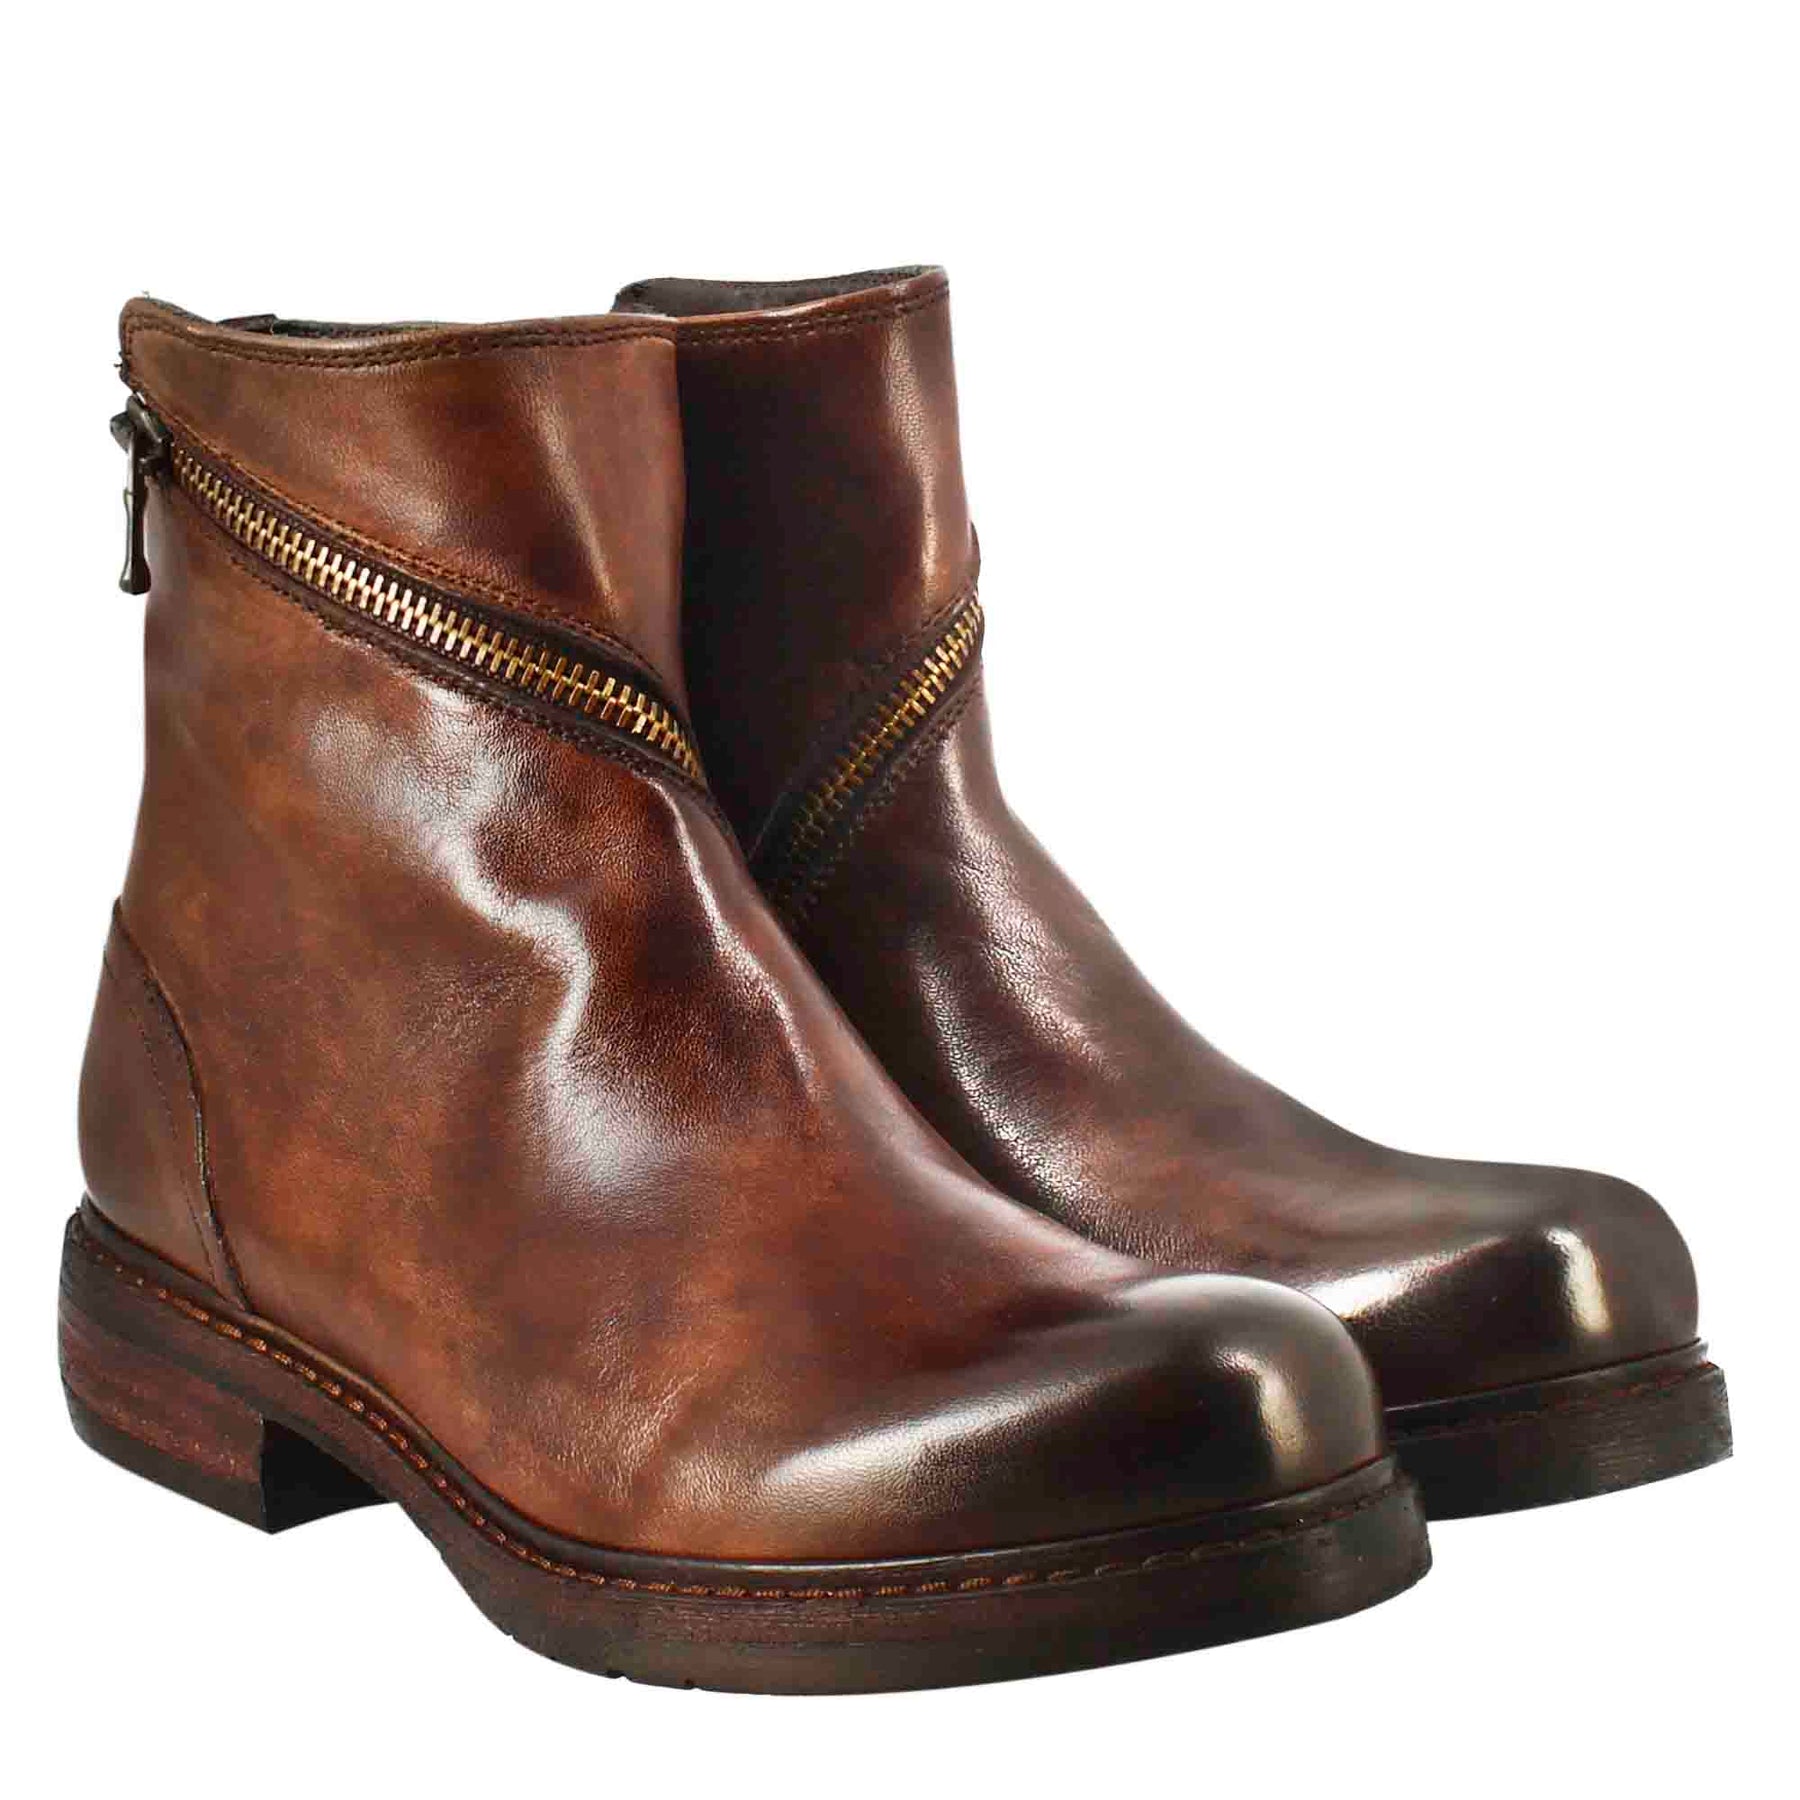 Paupa women's ankle boot in brown washed leather with double zip